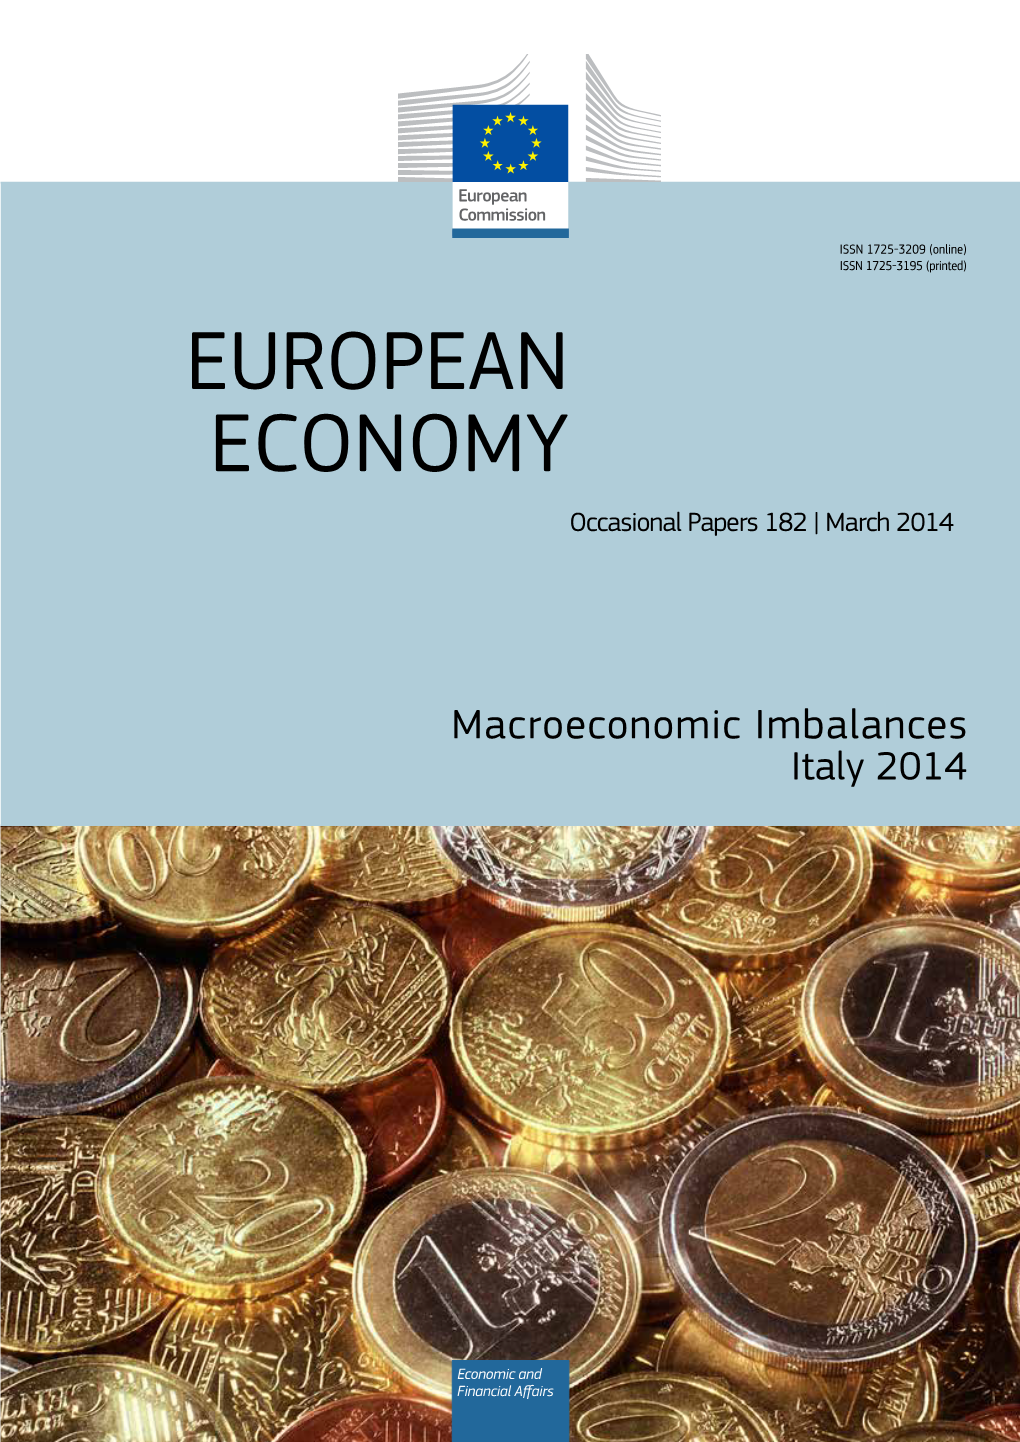 Macroeconomic Imbalances – Italy 2014 (European Commission, Directorate General for Economic and Financial Affairs) (March 2014)